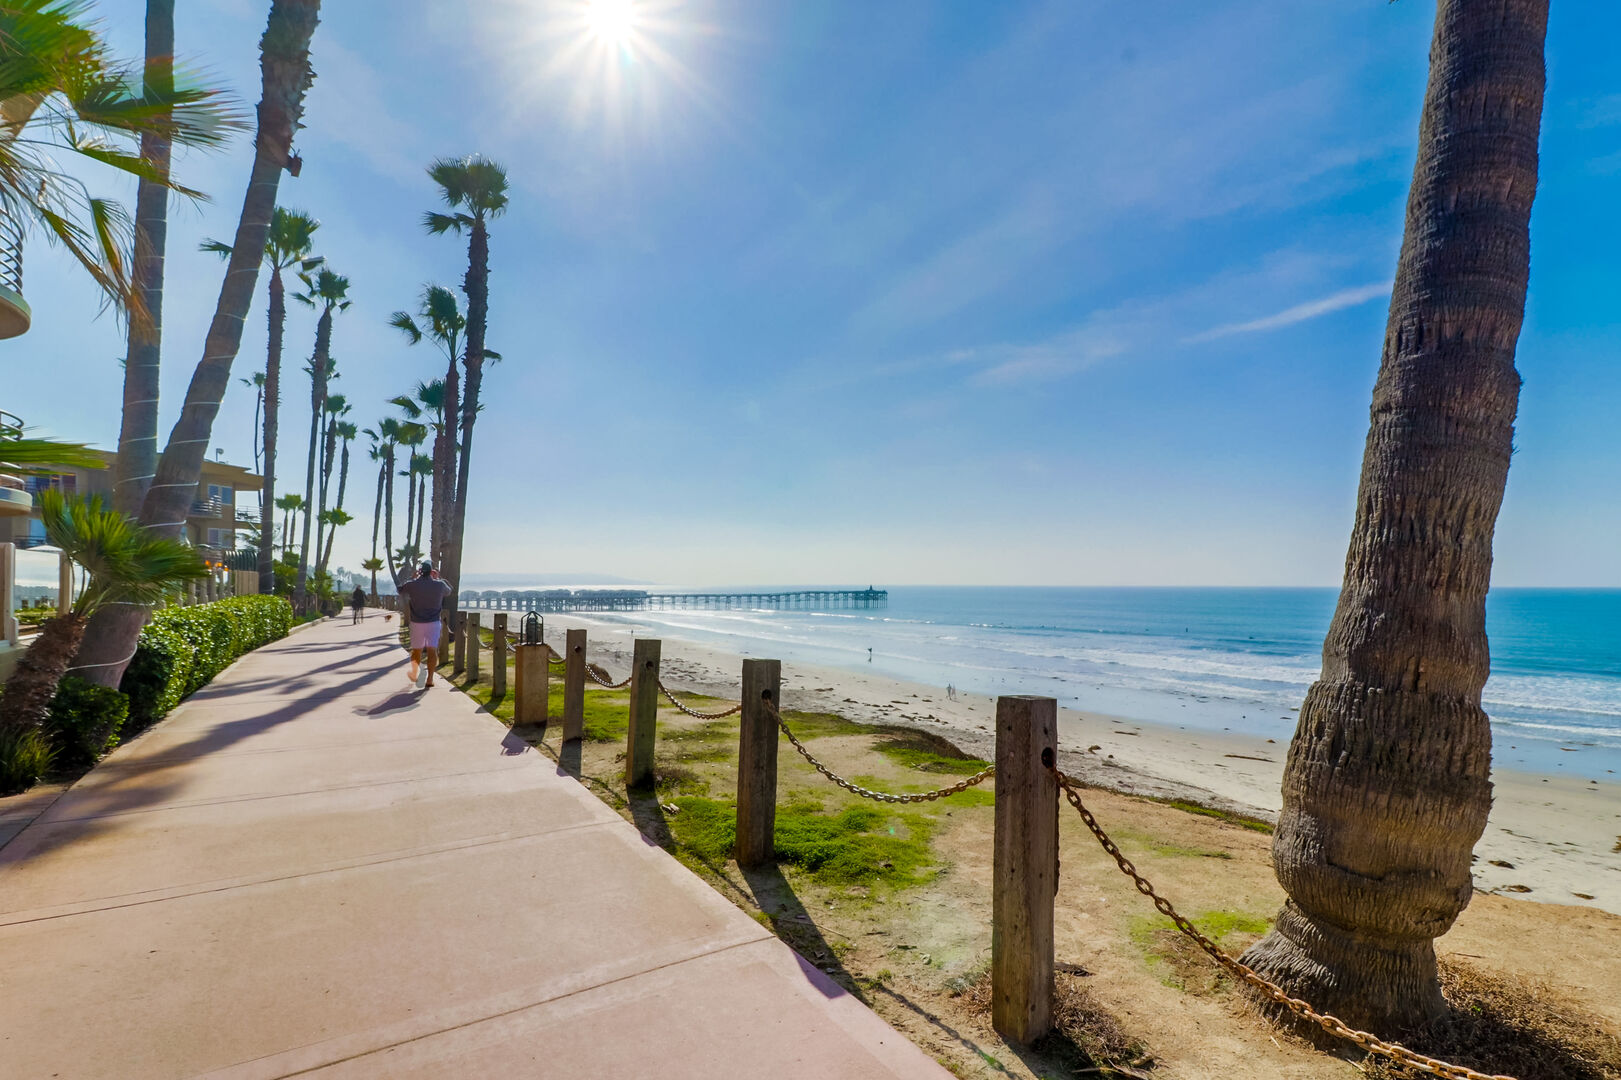 The Pacific Beach/ Mission Beach boardwalk is just steps from Capri by the Sea